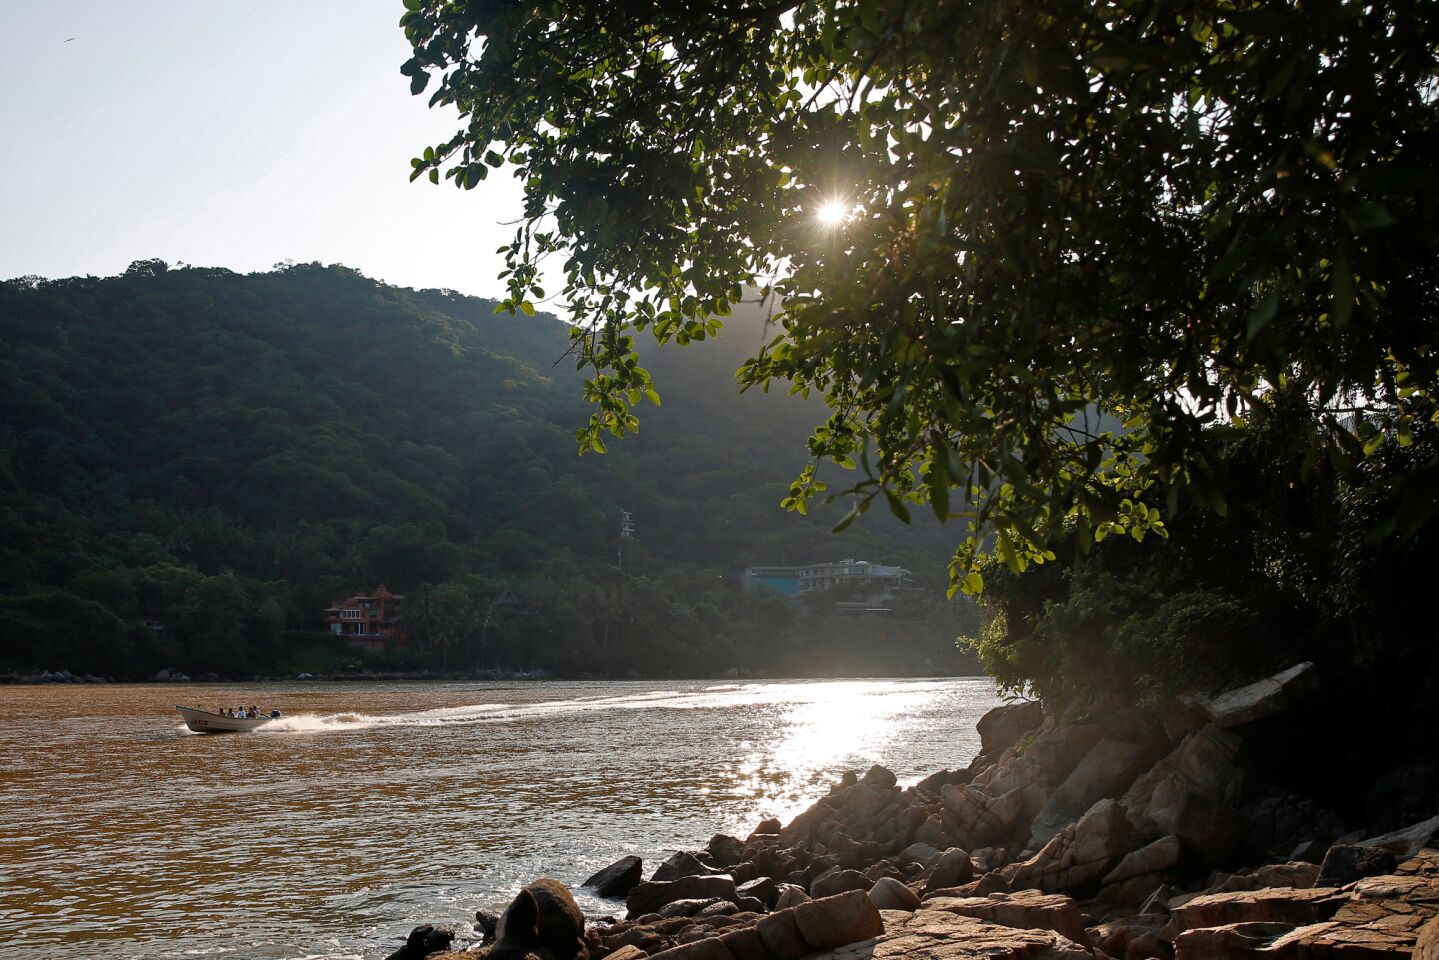 PUERTO VALLARTA, MEX-AUGUST 31, 2019: A boat leaves Boca de Tomatlan in the early morning on August 31, 2019 in Puerto Vallarta, Mexico. The Cabo Corrientes hiking trail is a route that mostly hugs the coastline. (Photo By Dania Maxwell / Los Angeles Times)